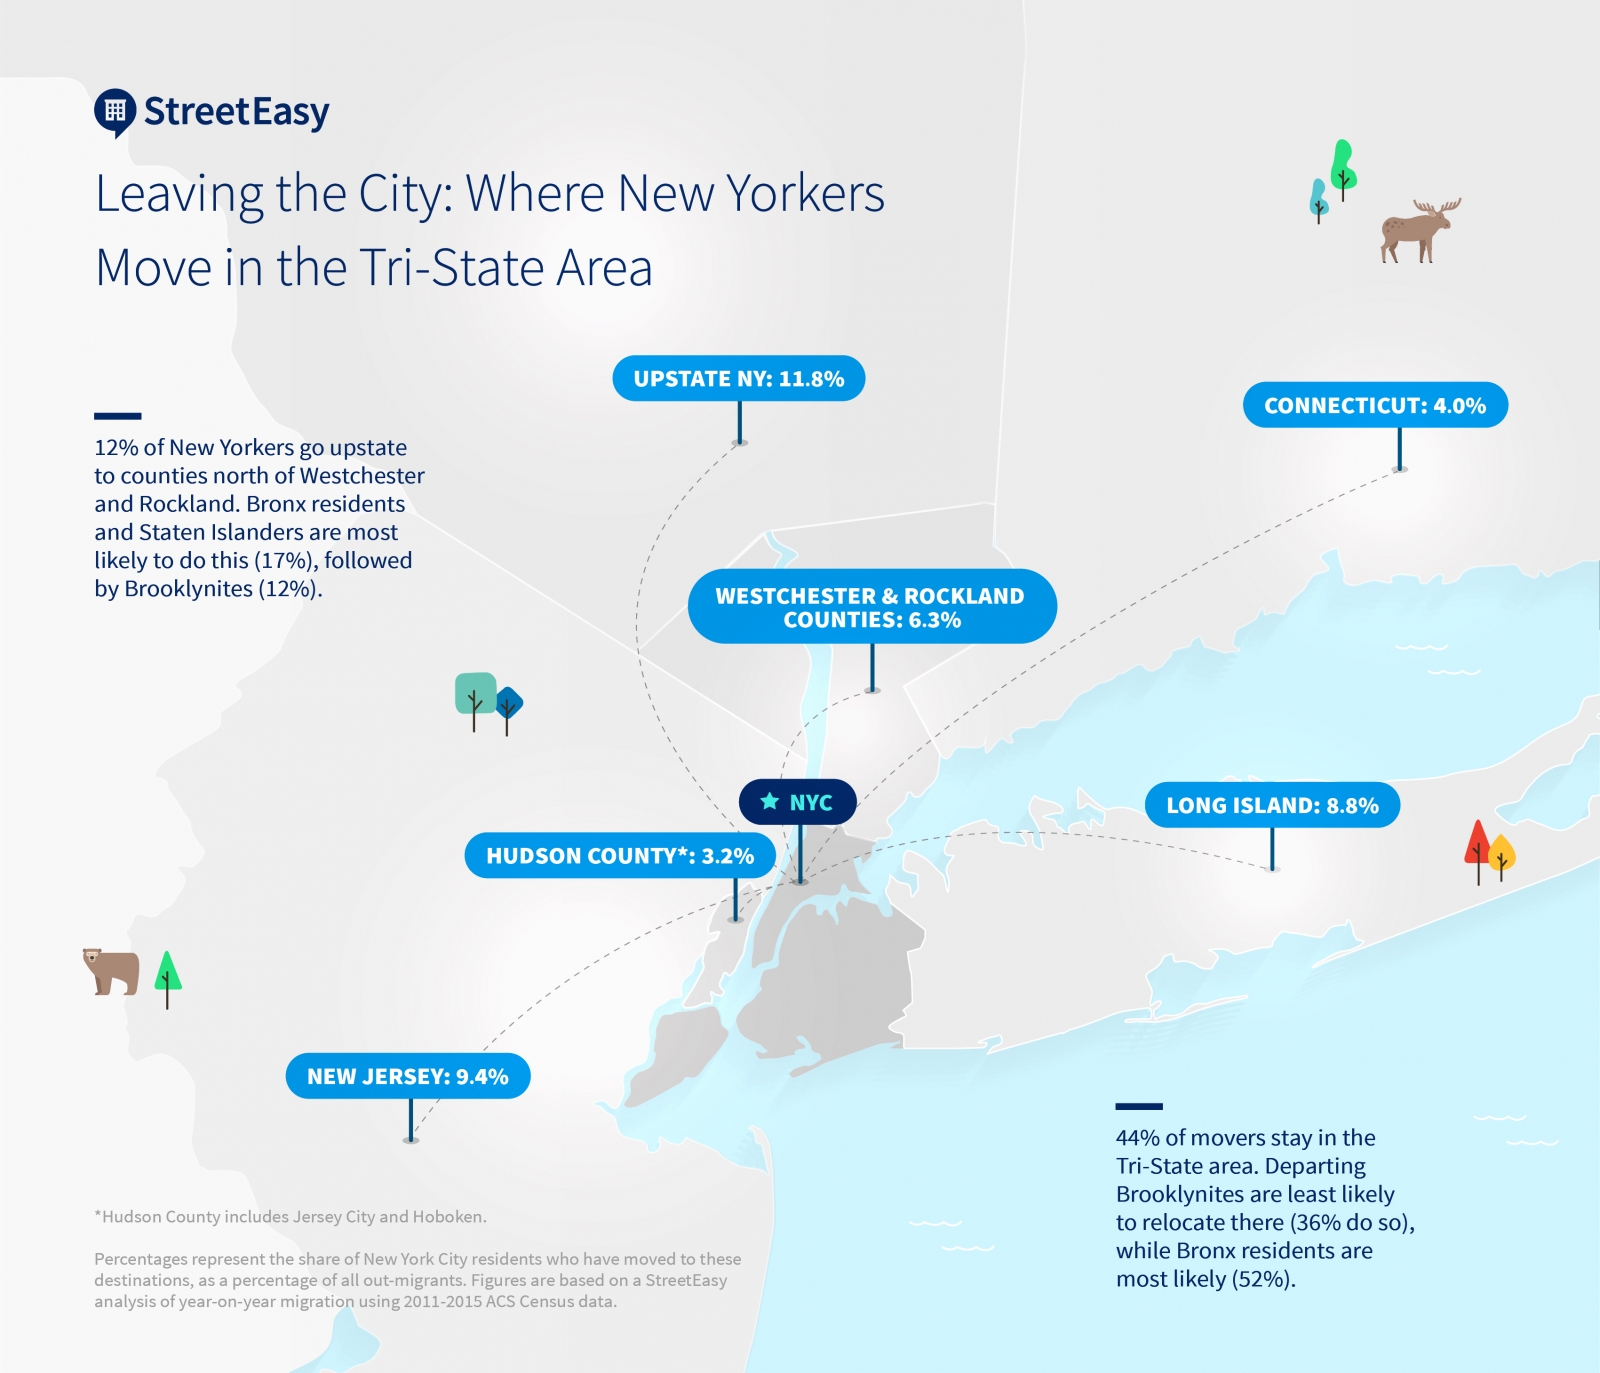 image of where new yorkers are moving regionally